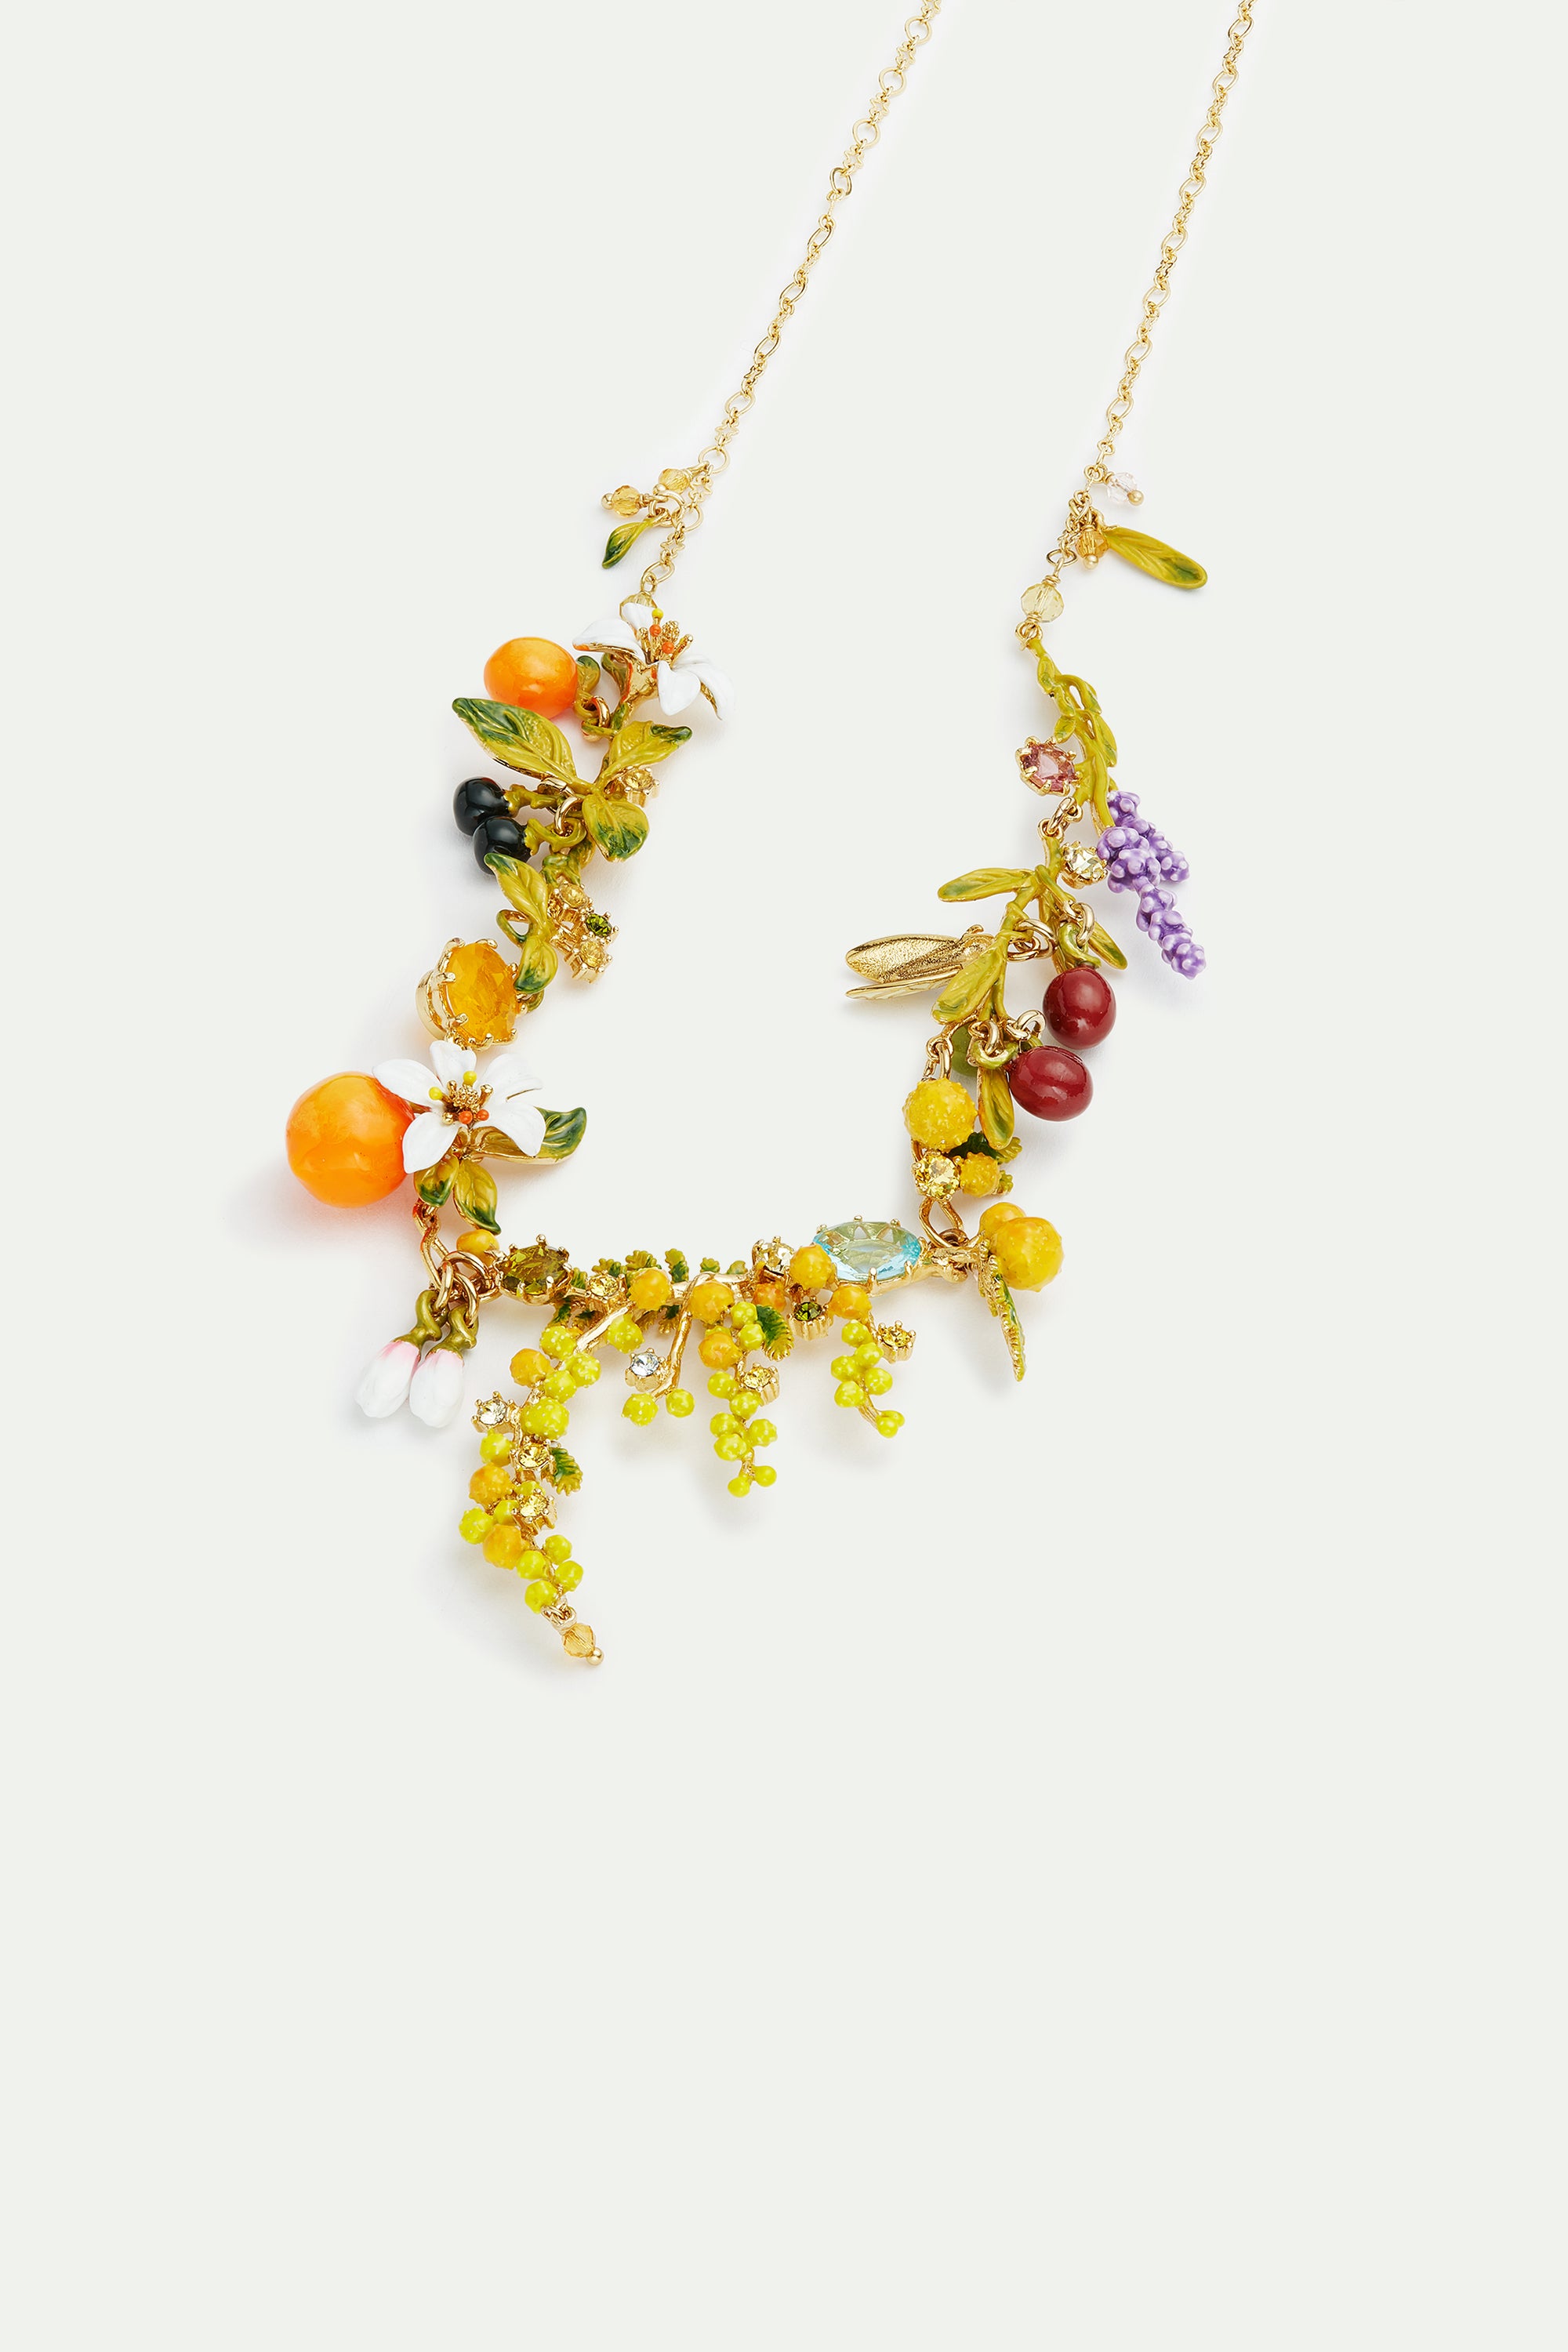 Multi element of the Provence garden collar necklace